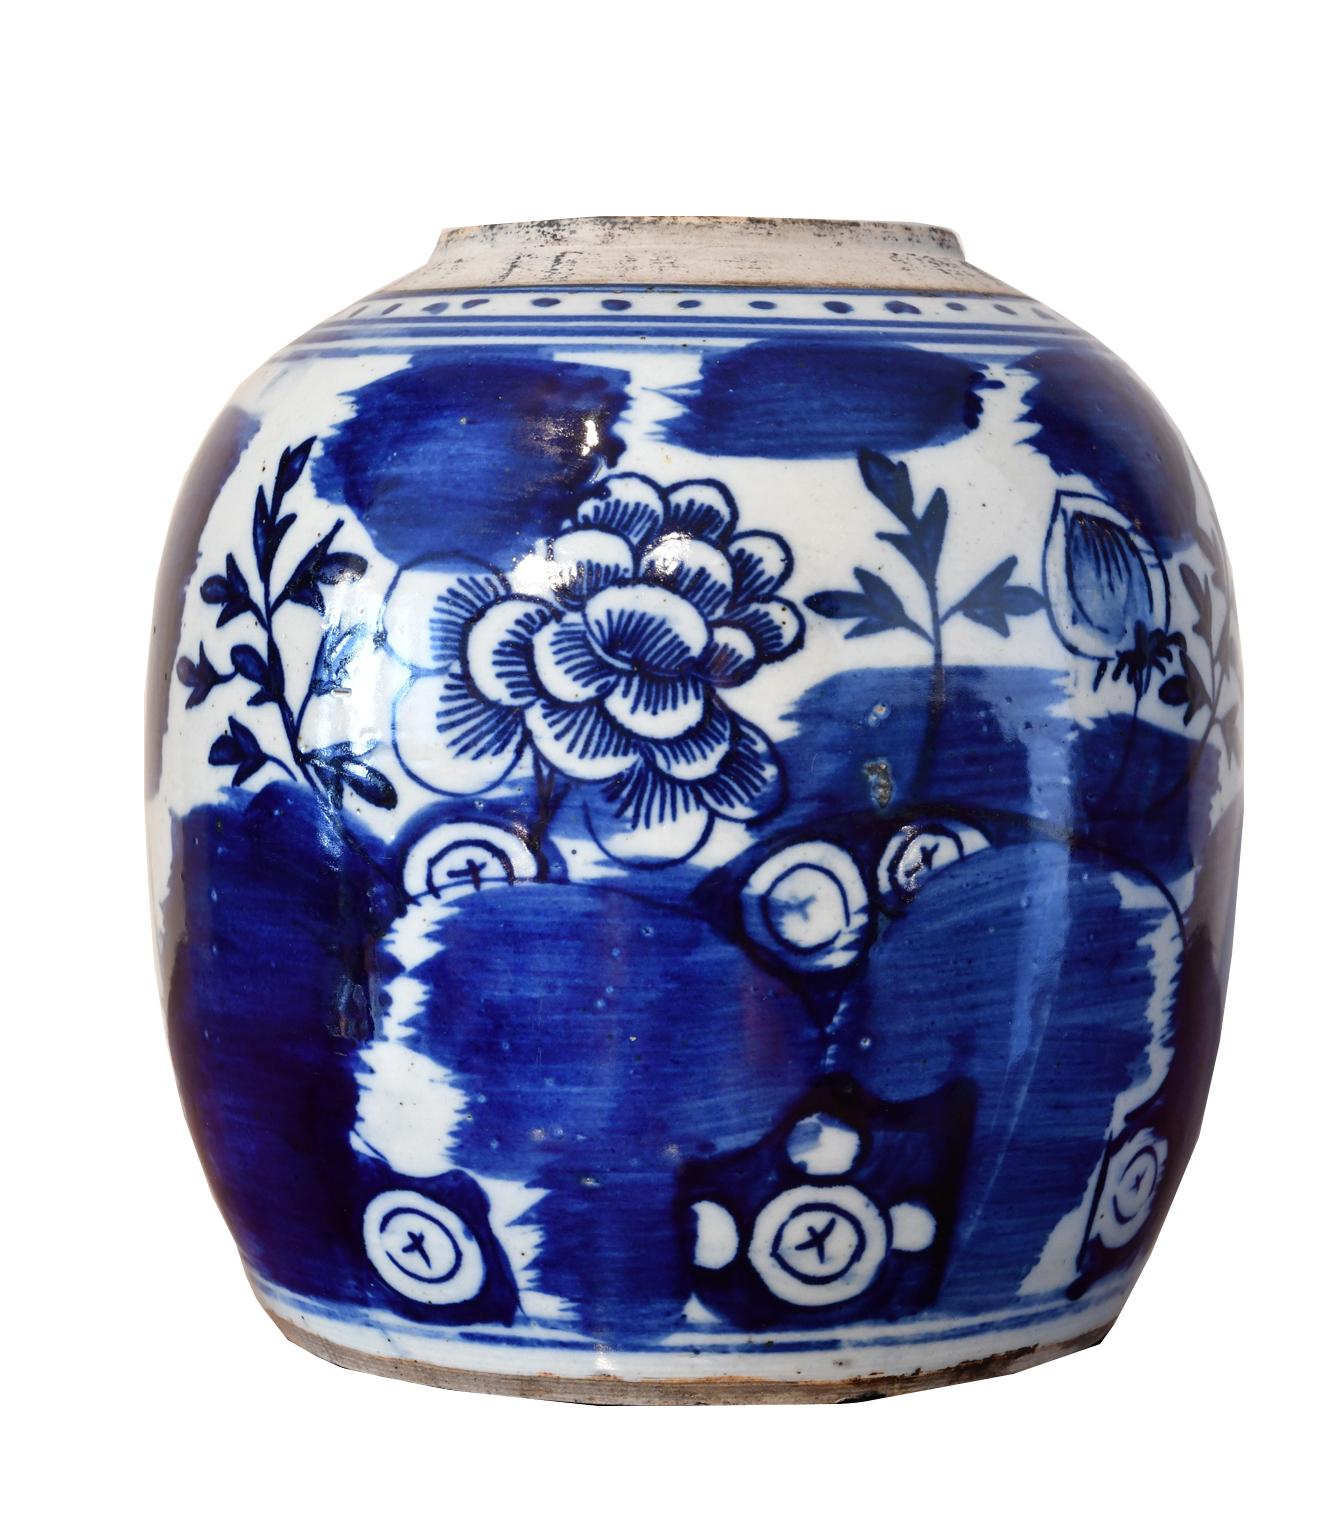 A very beautiful Chinese porcelain jar with hand-painted cobalt blue decorative elements that include a large peony blossom, which in Chinese art symbolizes beauty, rank, higher social status, luxury and opulence. Also depicted, amidst bold patches